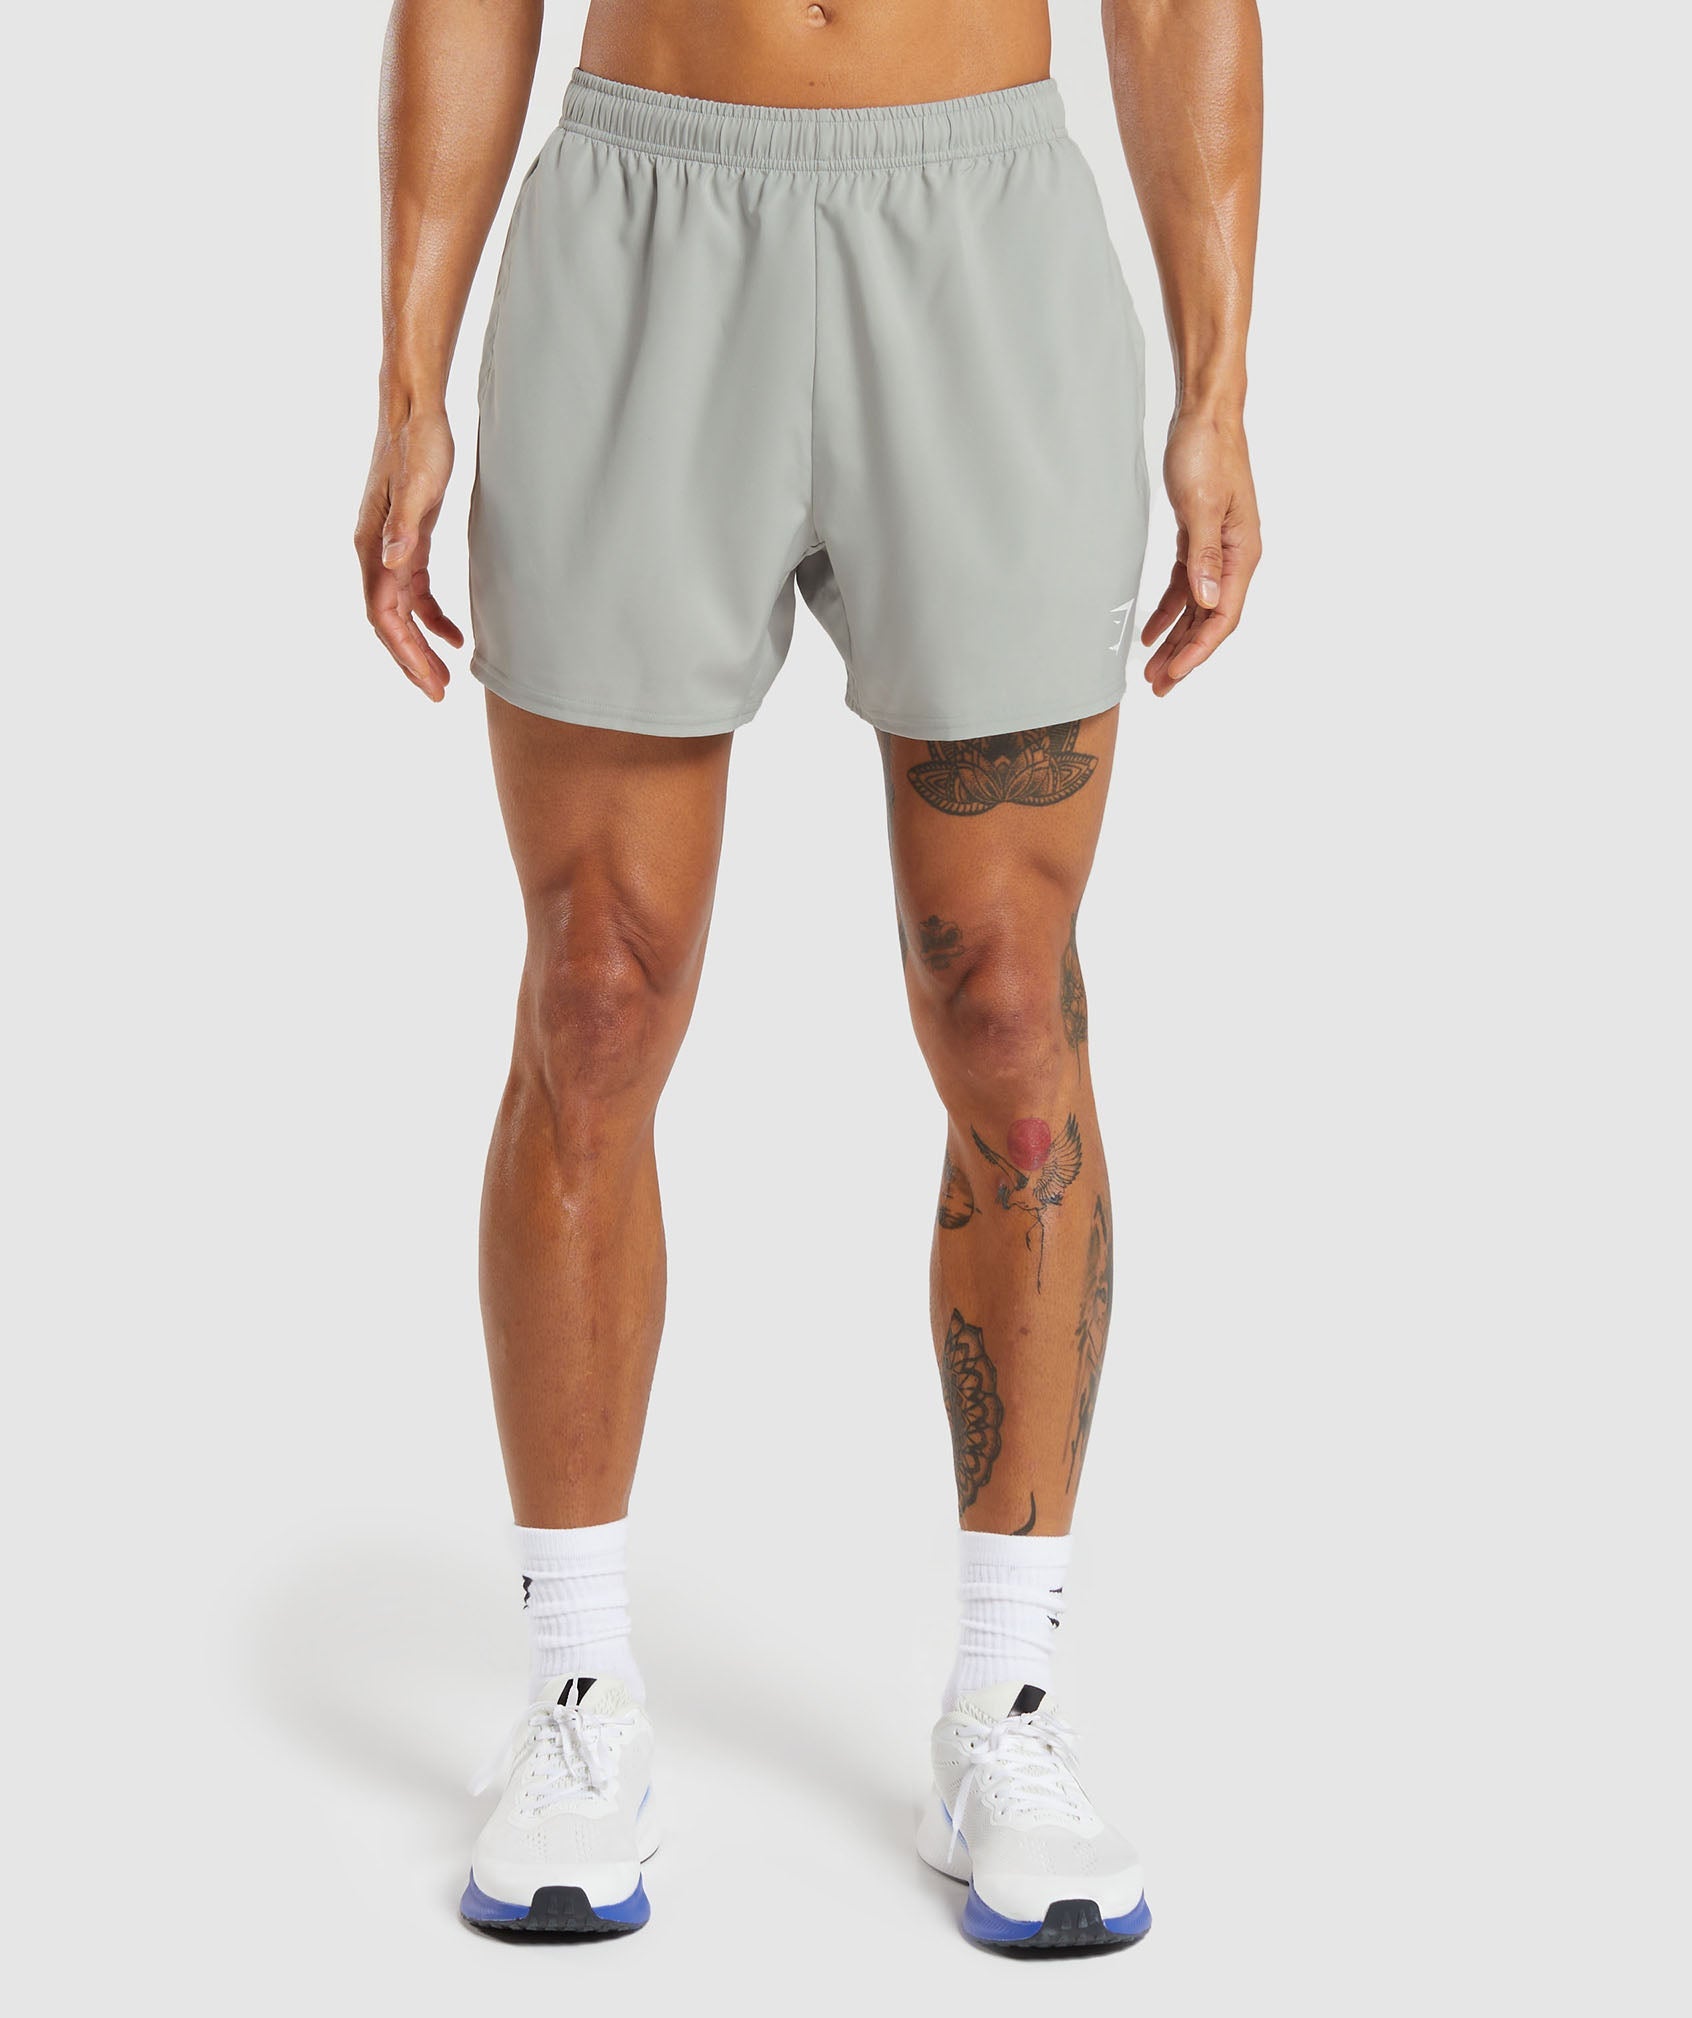 Arrival 5" Shorts in Stone Grey - view 1